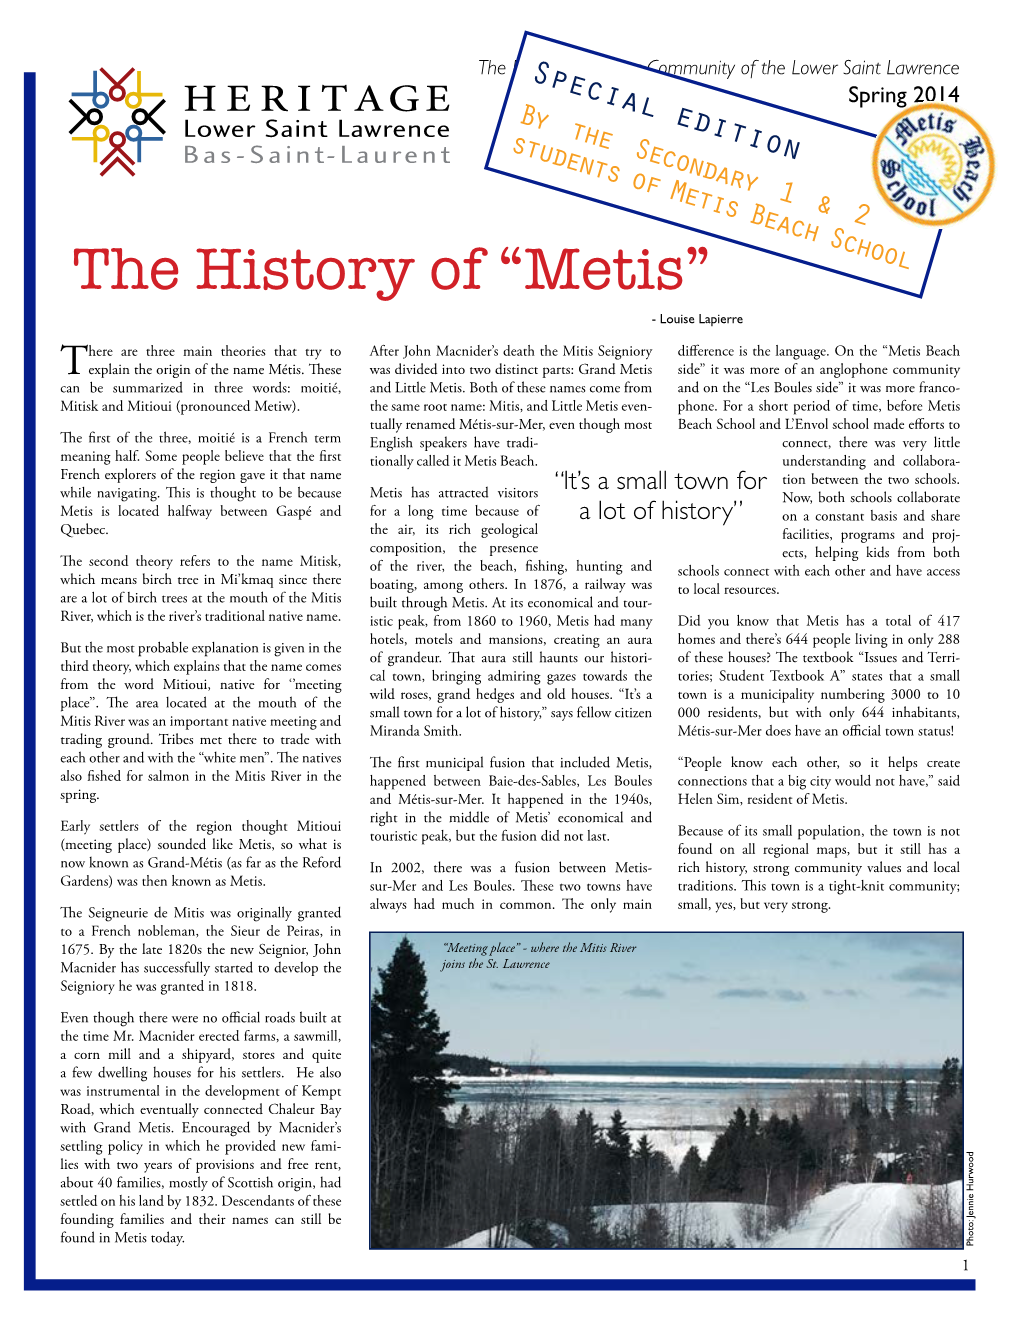 The History of “Metis” - Louise Lapierre